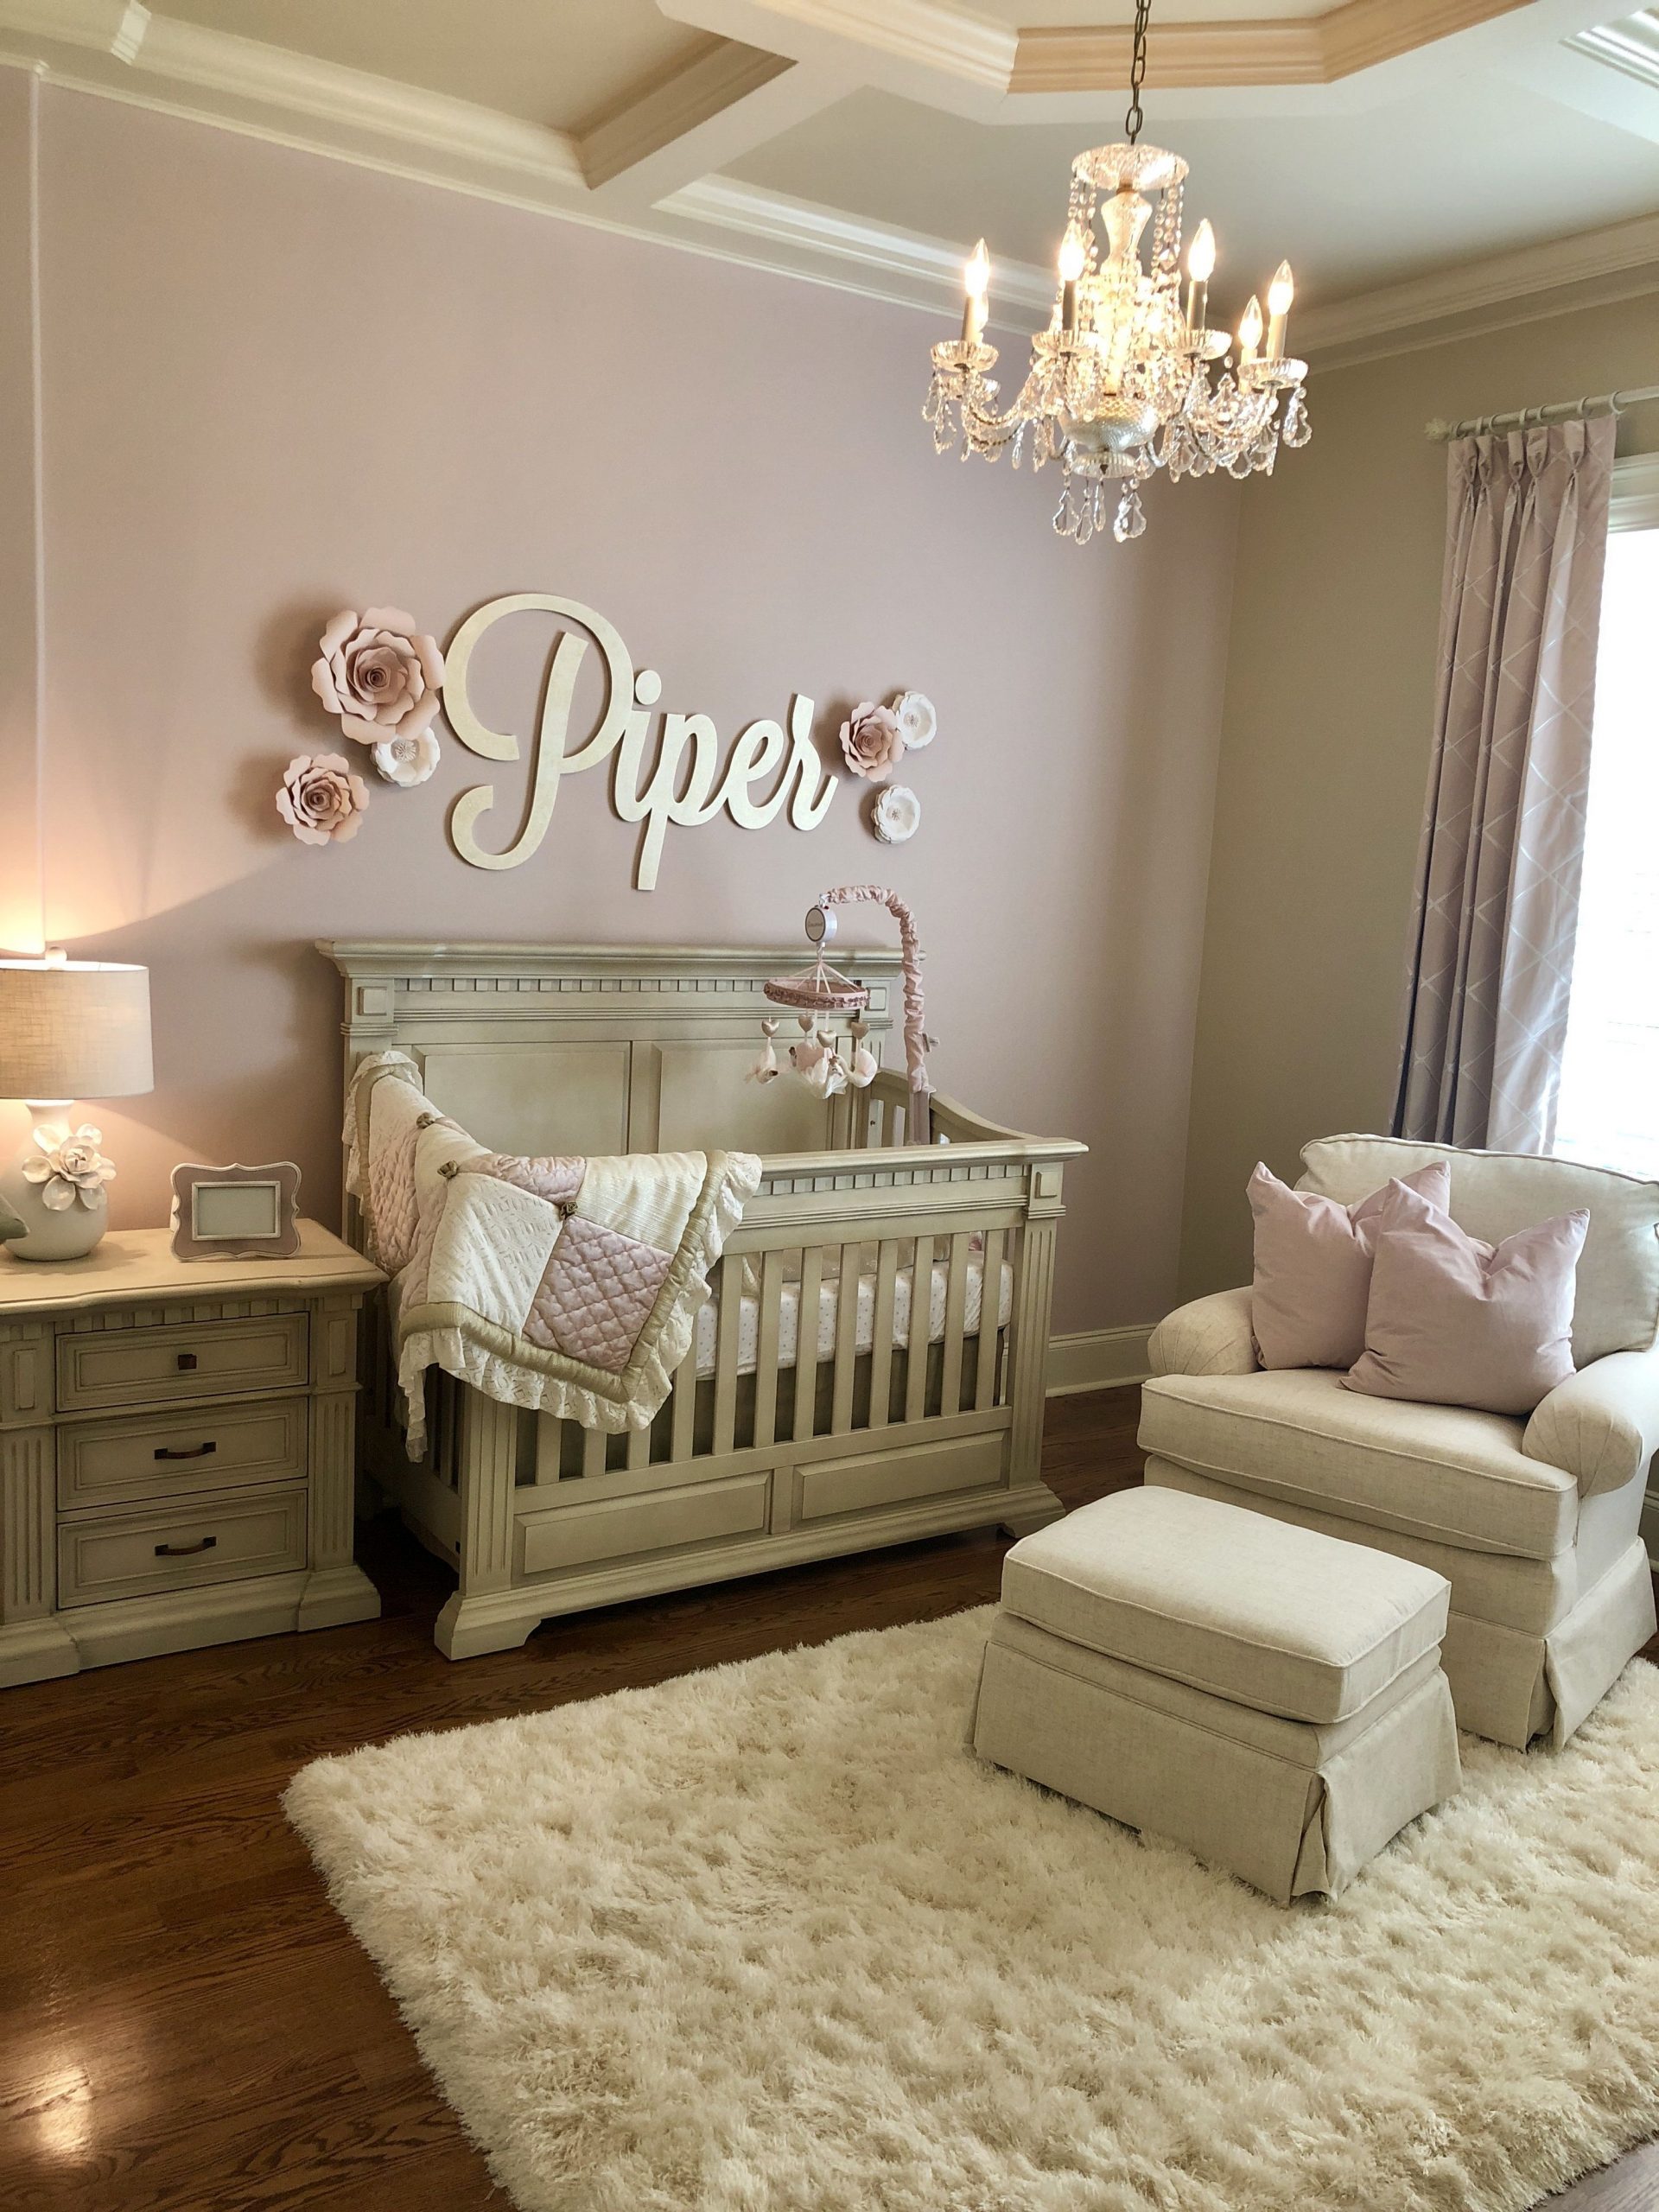 50 Inspiring Nursery Ideas for Your Baby Girl Cute Designs You’ll Love